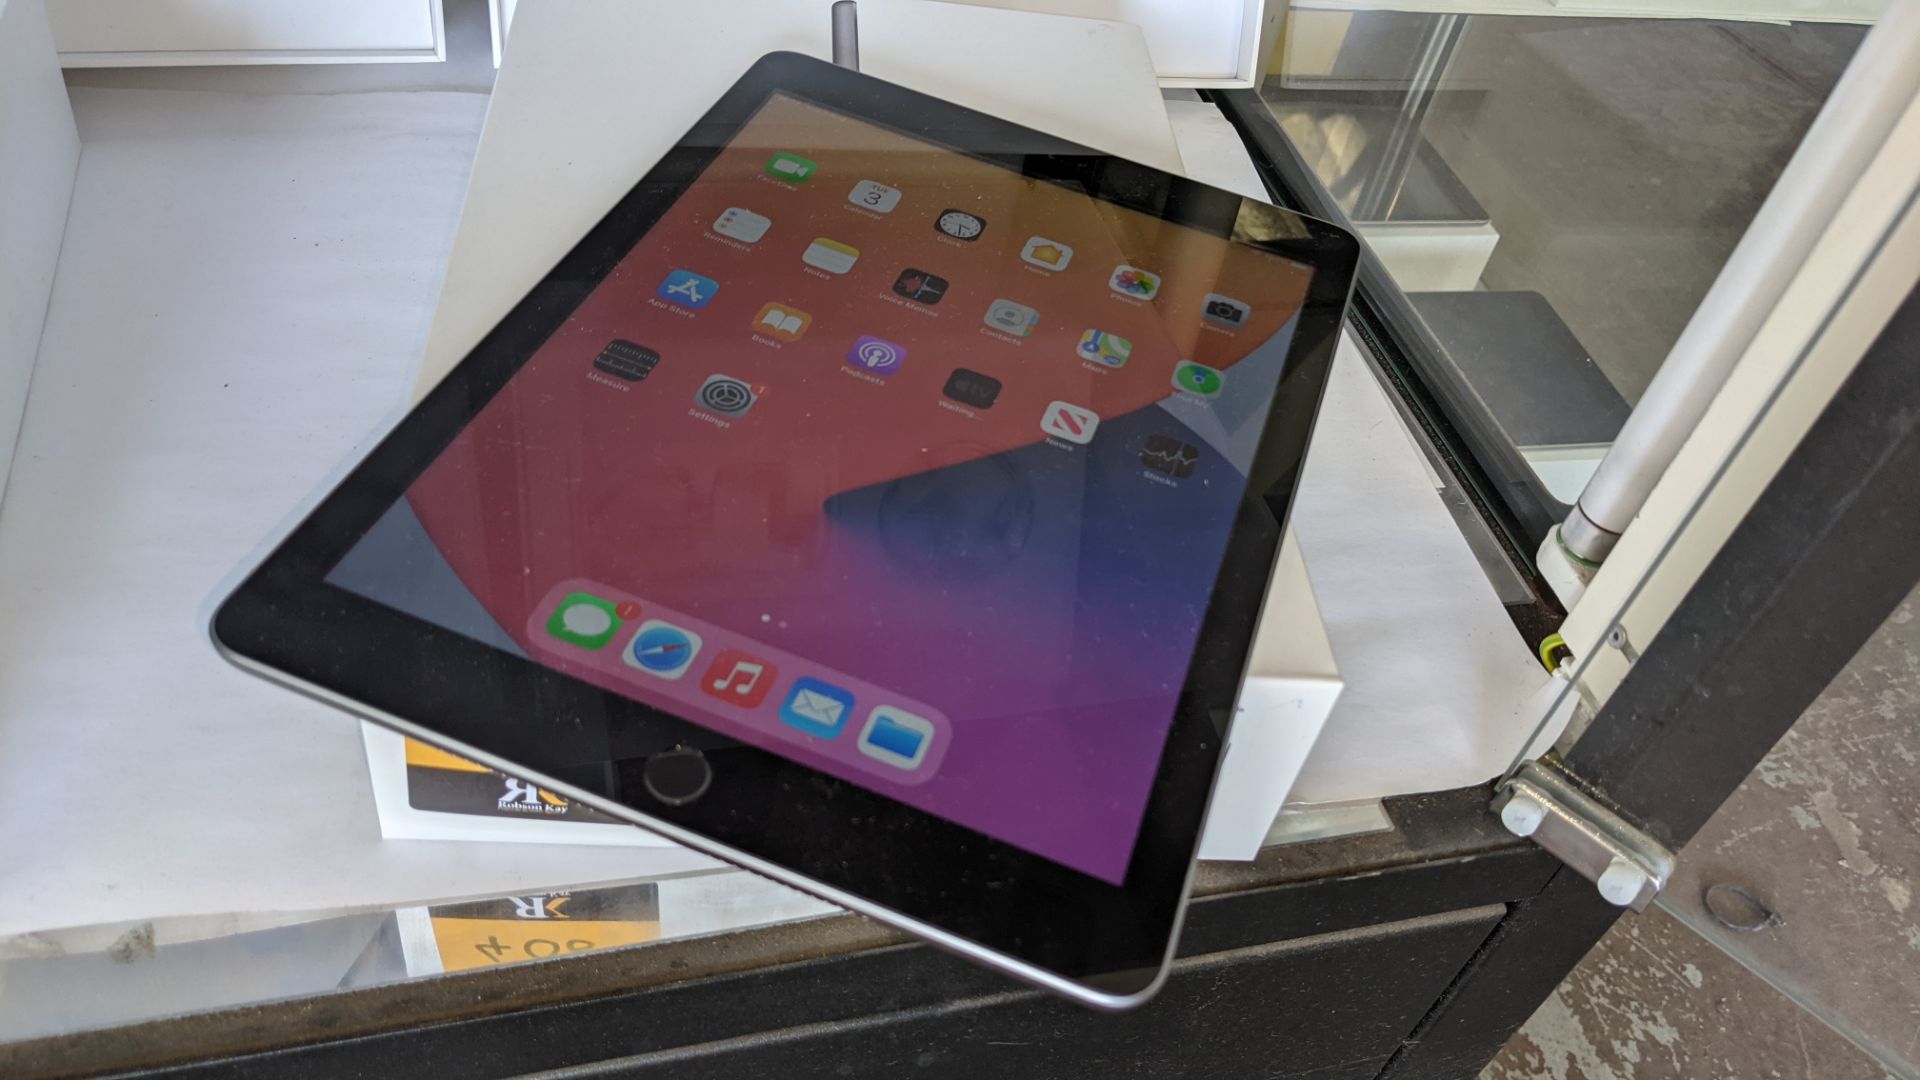 Apple iPad (space grey) 5th generation 32Gb Wi-Fi 9.7" Retina screen. Product code A1822. Apple A9 - Image 3 of 12